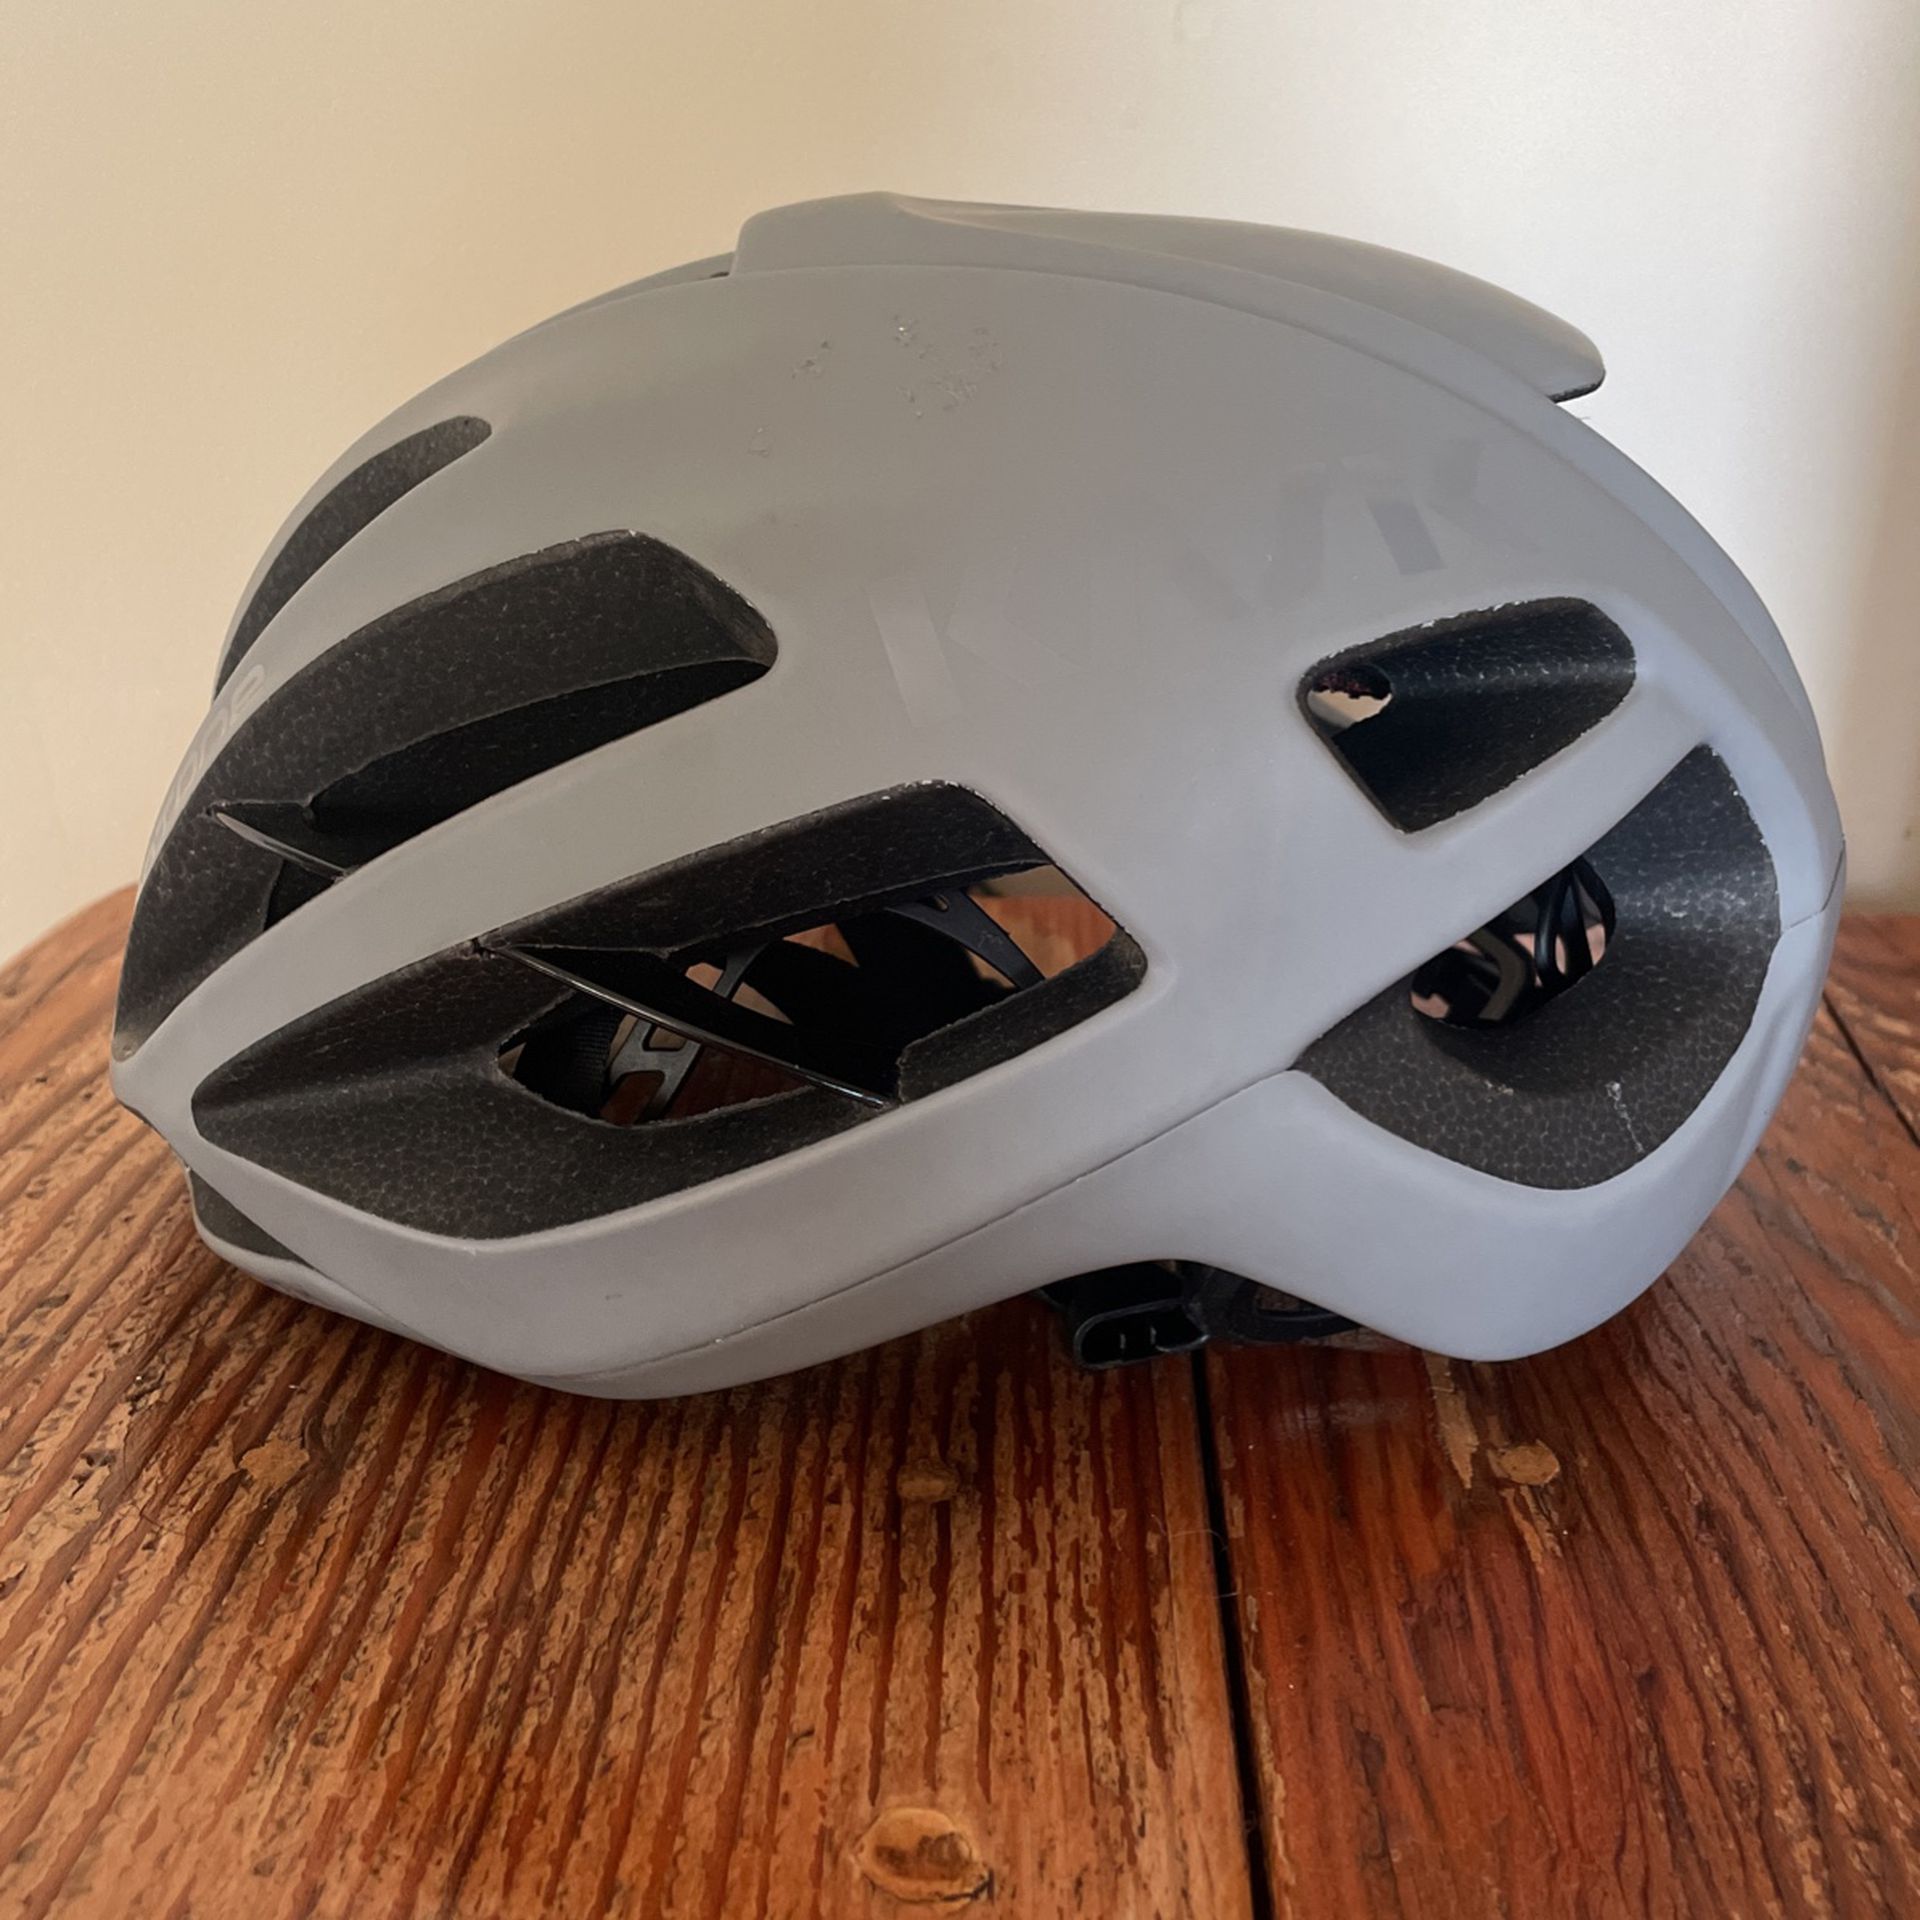 Kask Protone S Grey Mat for Sale in Del Rey, CA - OfferUp